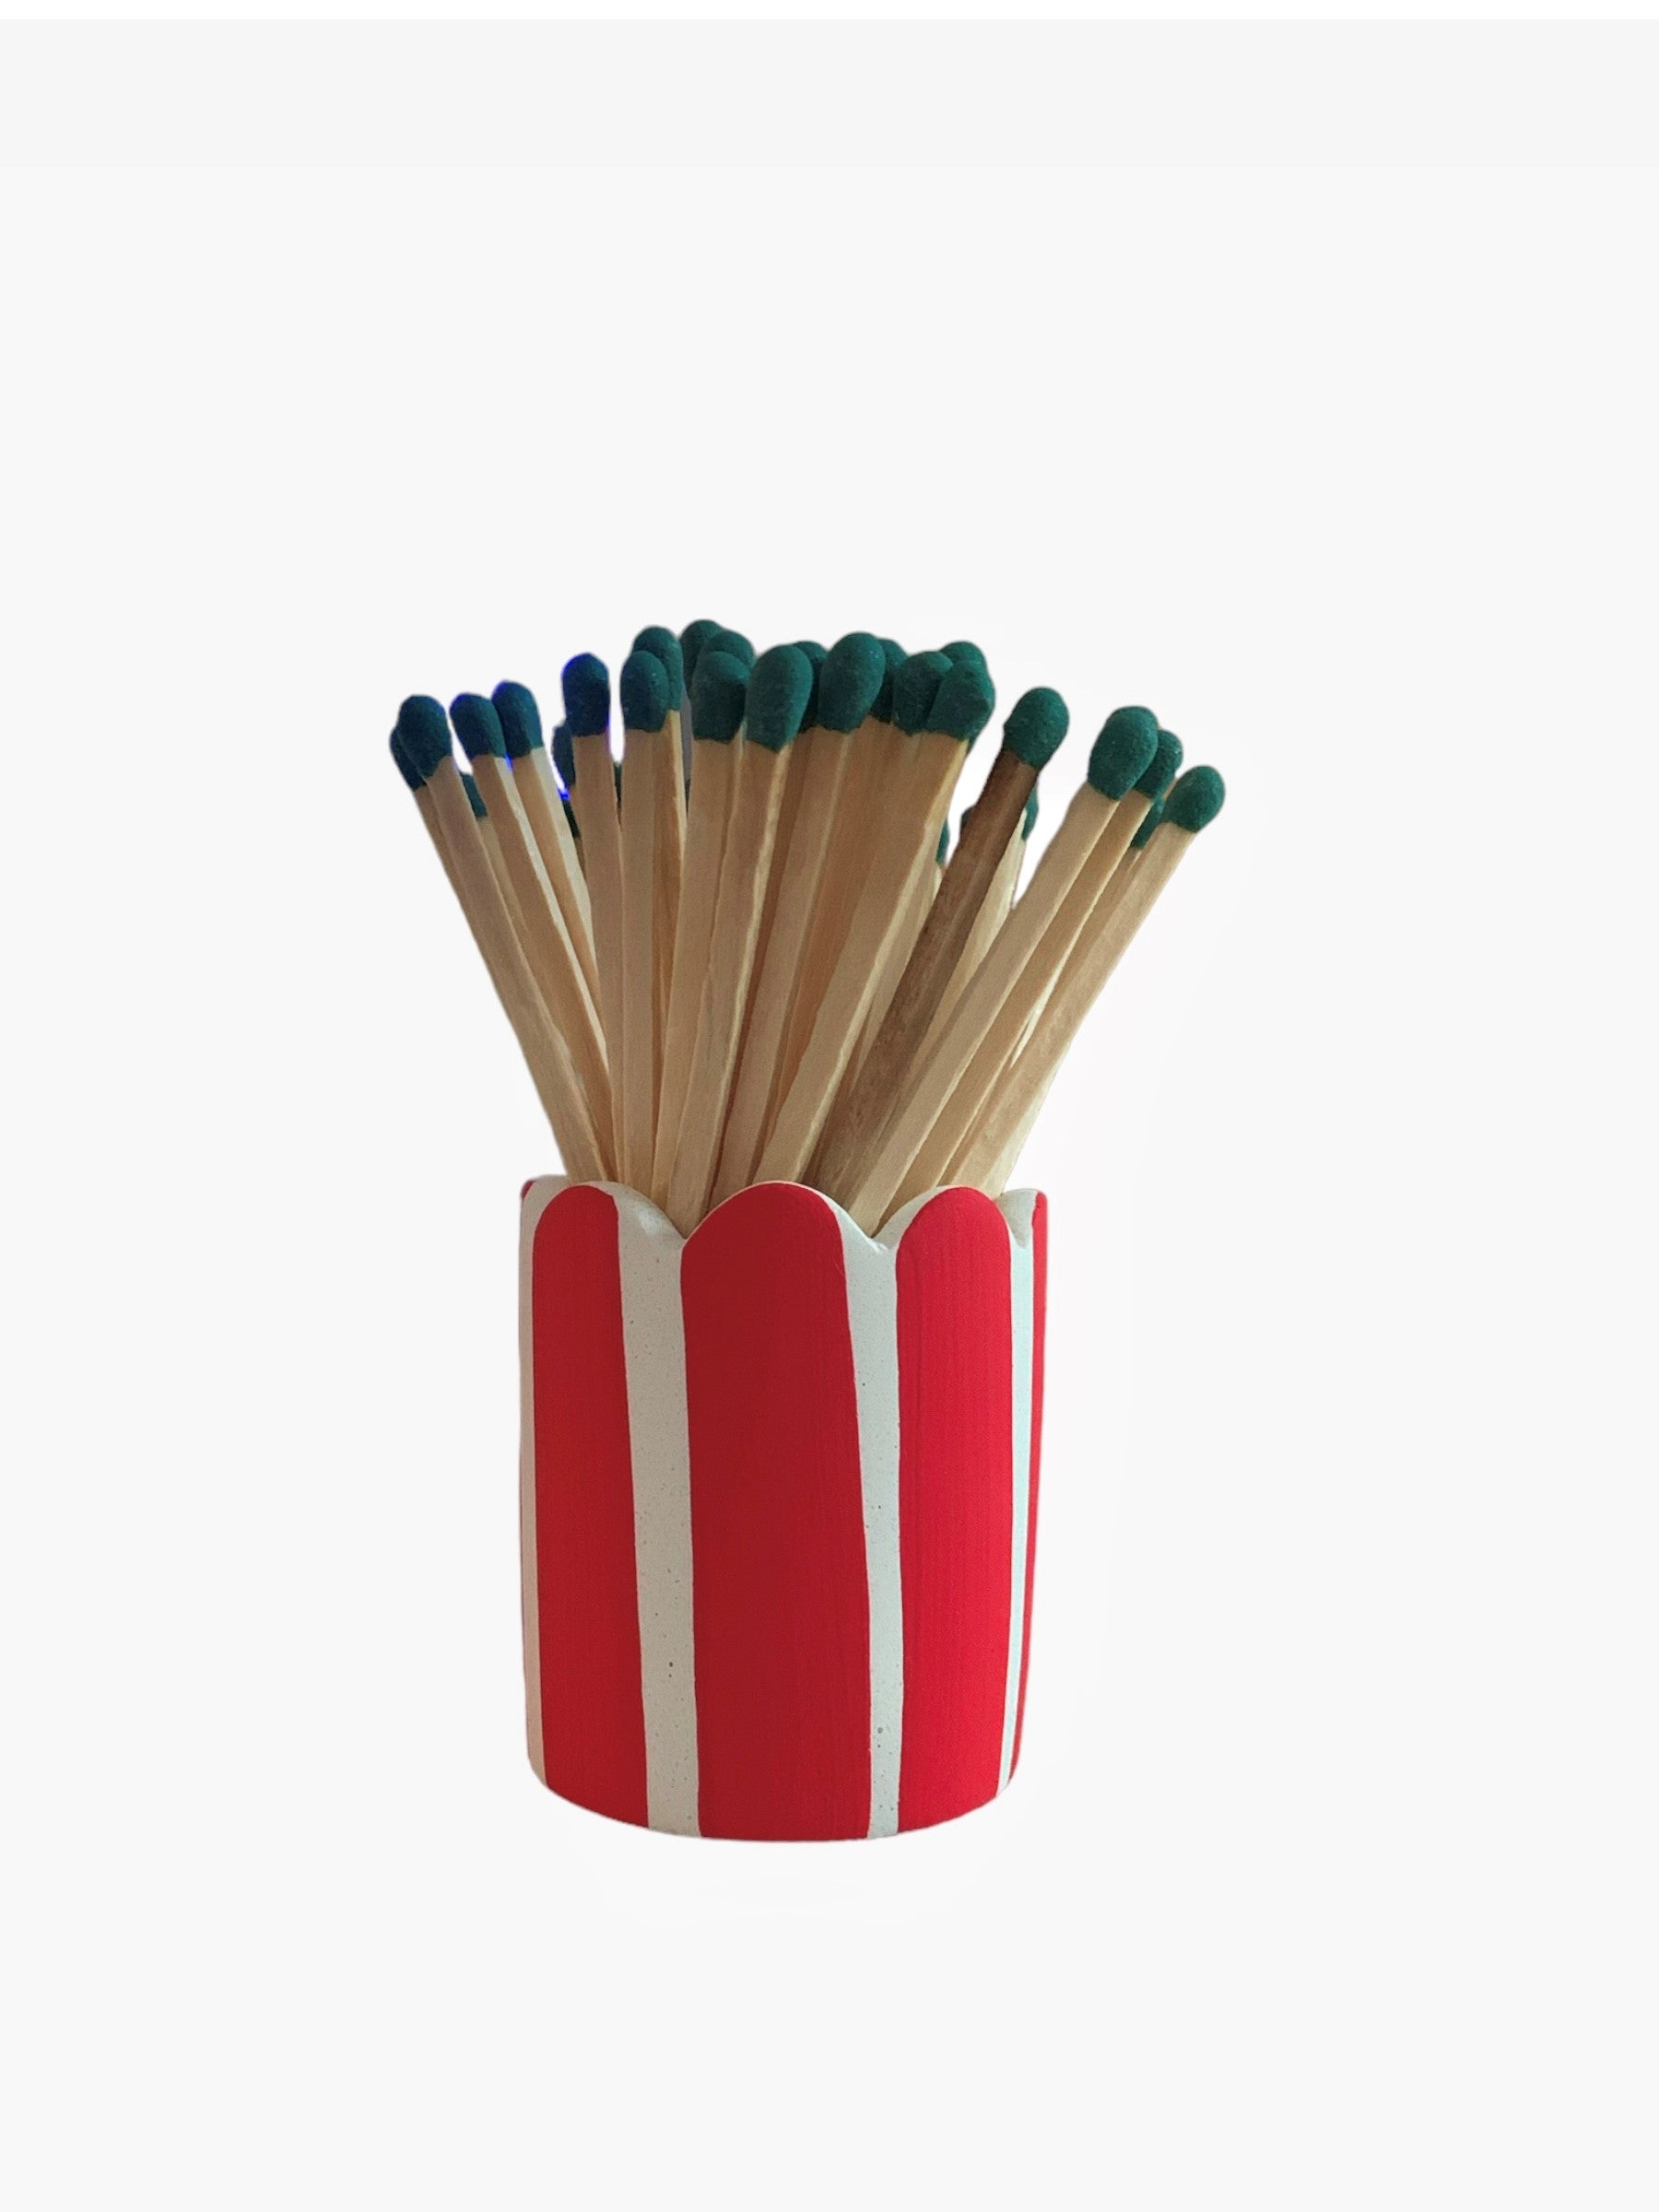 A red and white striped matchstick pot with scalloped edges and green matches.